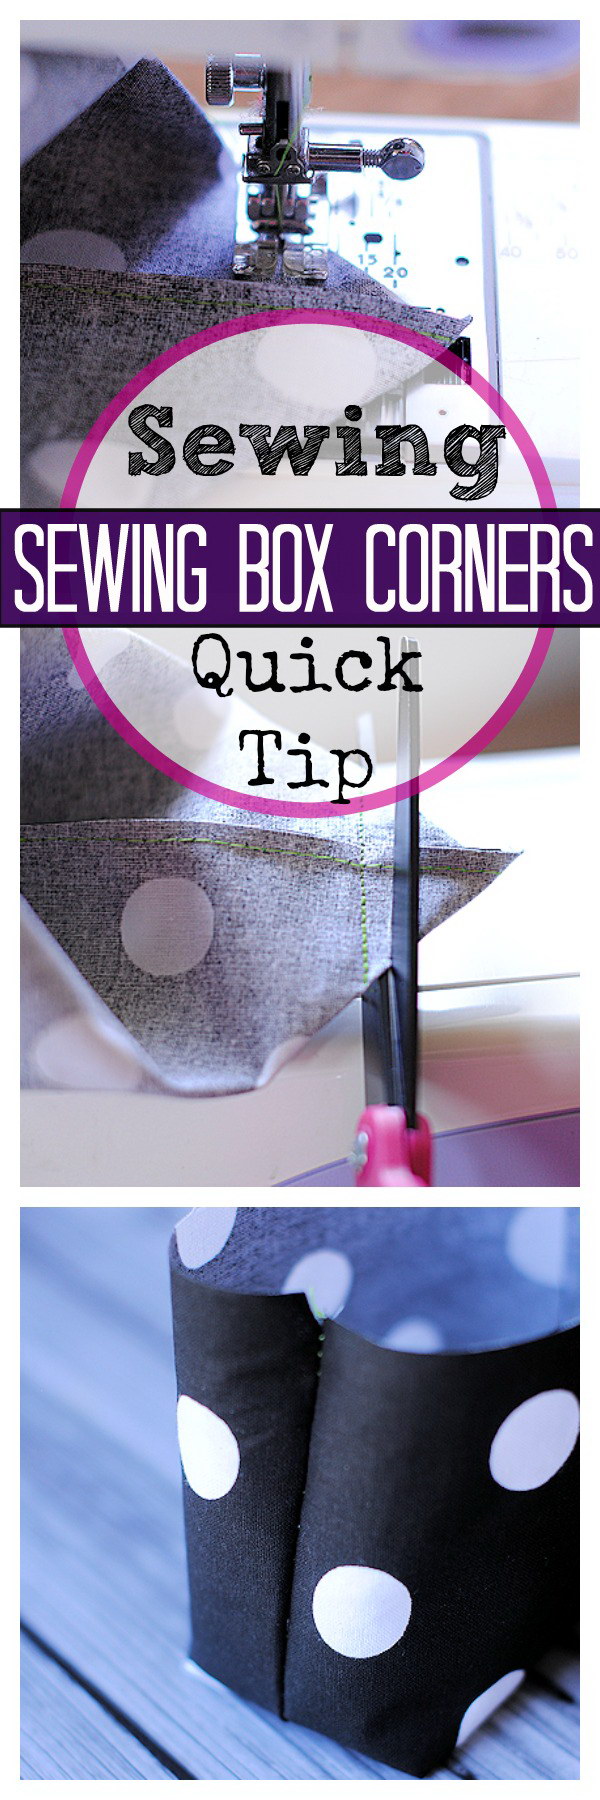 Sewing Quick Tip: How to Sew Box Corners. 